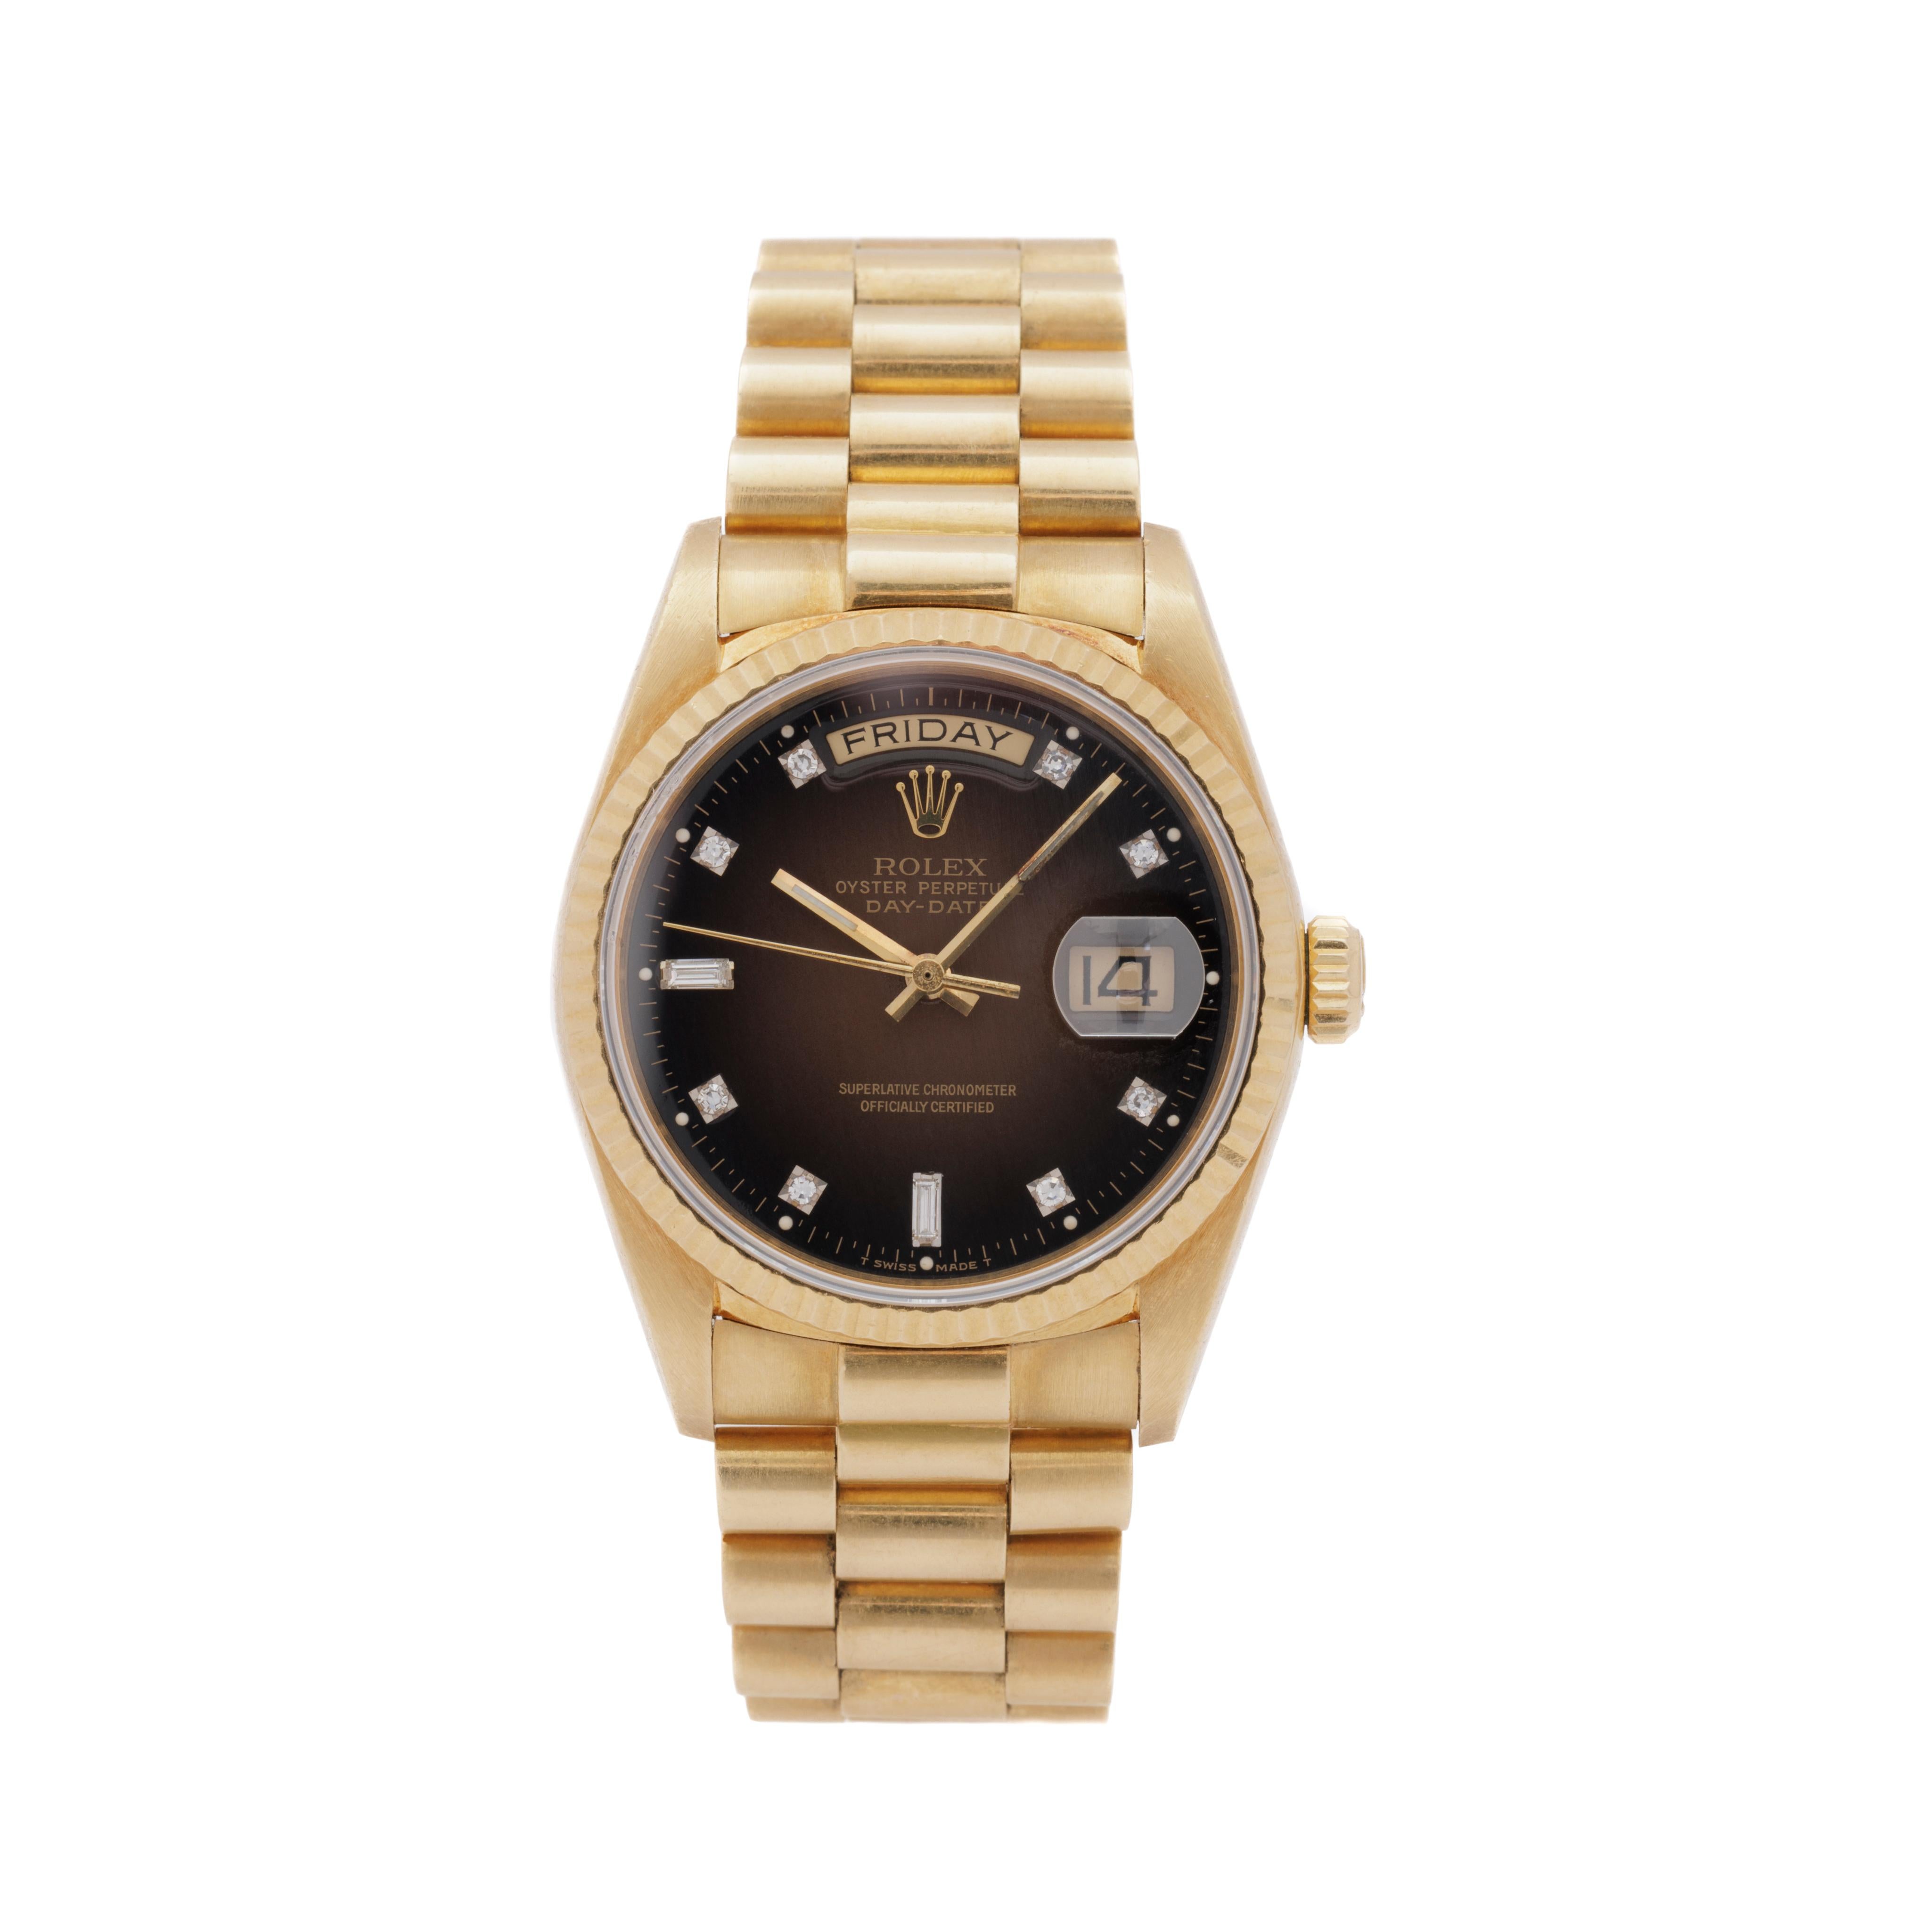 Vintage 1986 Rolex Day Date President with Rare Brown Burst Dial Box Papers

Maker: Rolex 
Model: 18038 Day Date
Year: 1986
Material: 18K Yellow Gold, Brilliant cut and Baguette cut Diamonds
Dial: Extremely Rare Brown Burst Dial 
Movement: